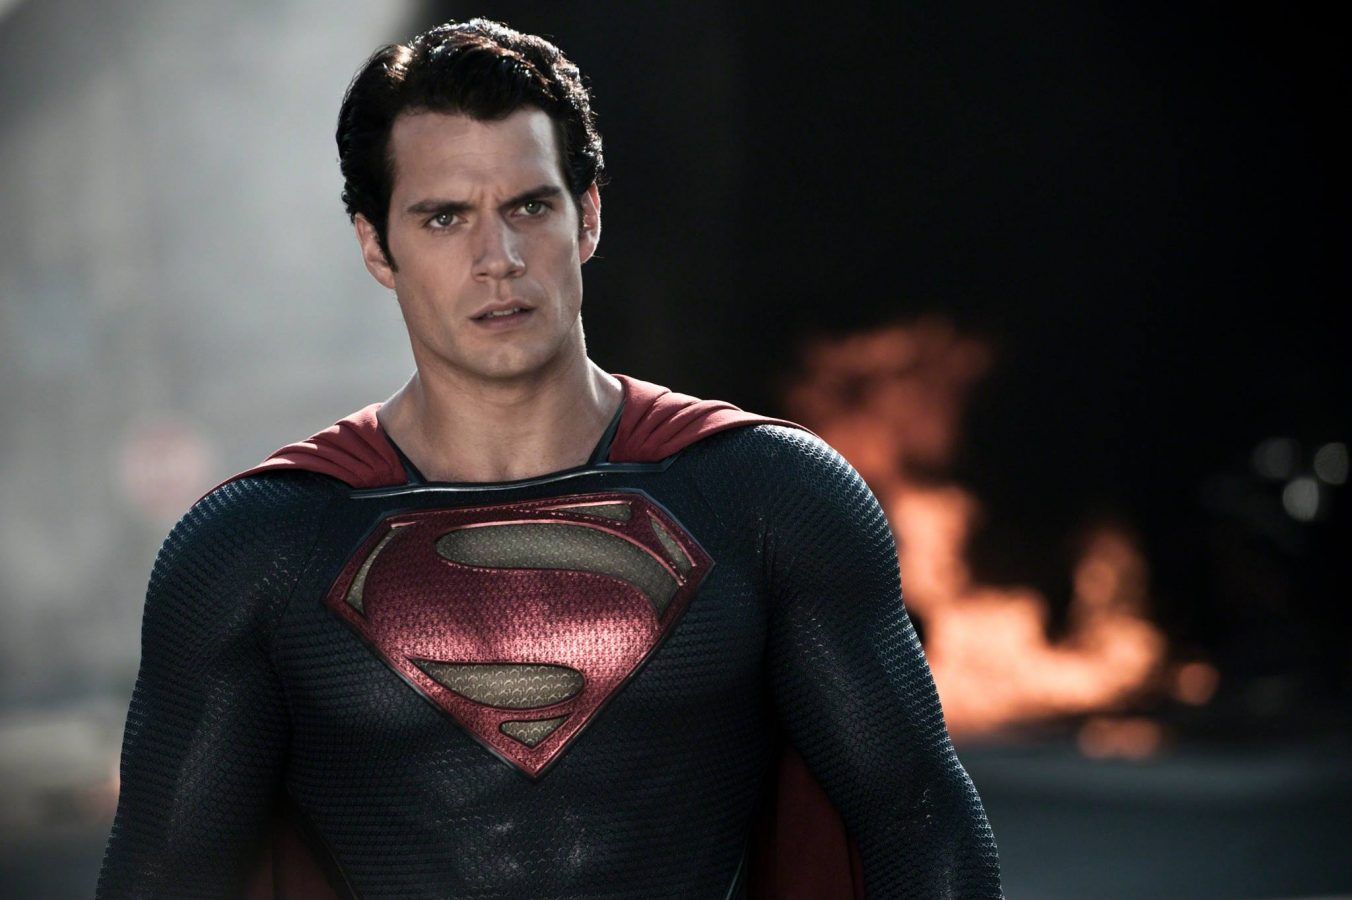 The Flash Movie Confirms Return to Man of Steel Time Period